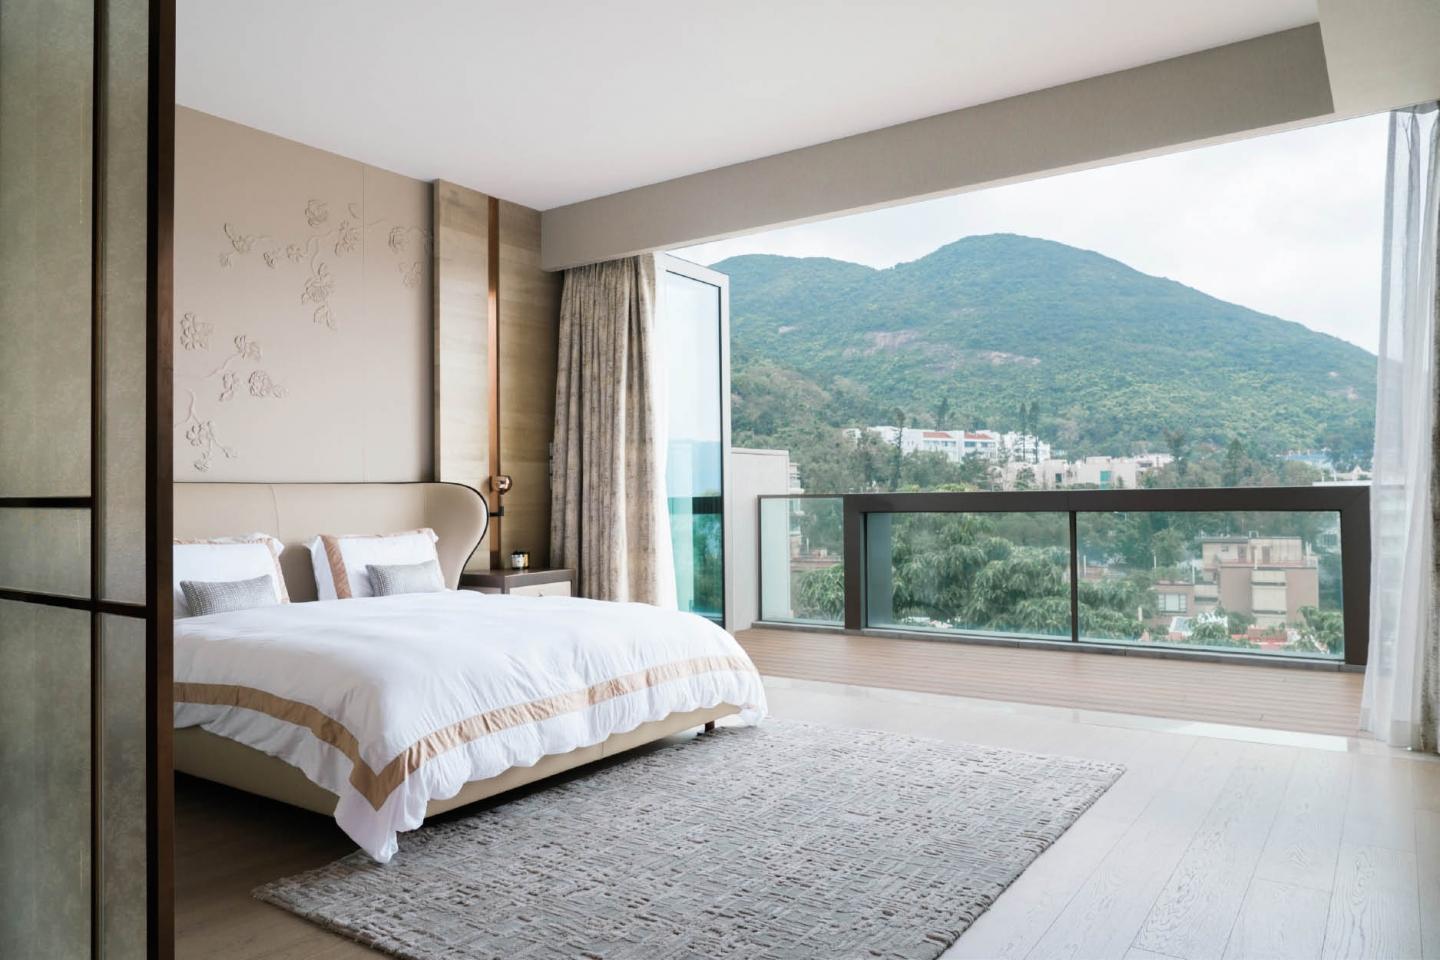 The tranquil master bedroom is the professional's sacred retreat to unwind and recharge. Soft furnishings and wallcoverings from Coltex imbue warmth throughout the space